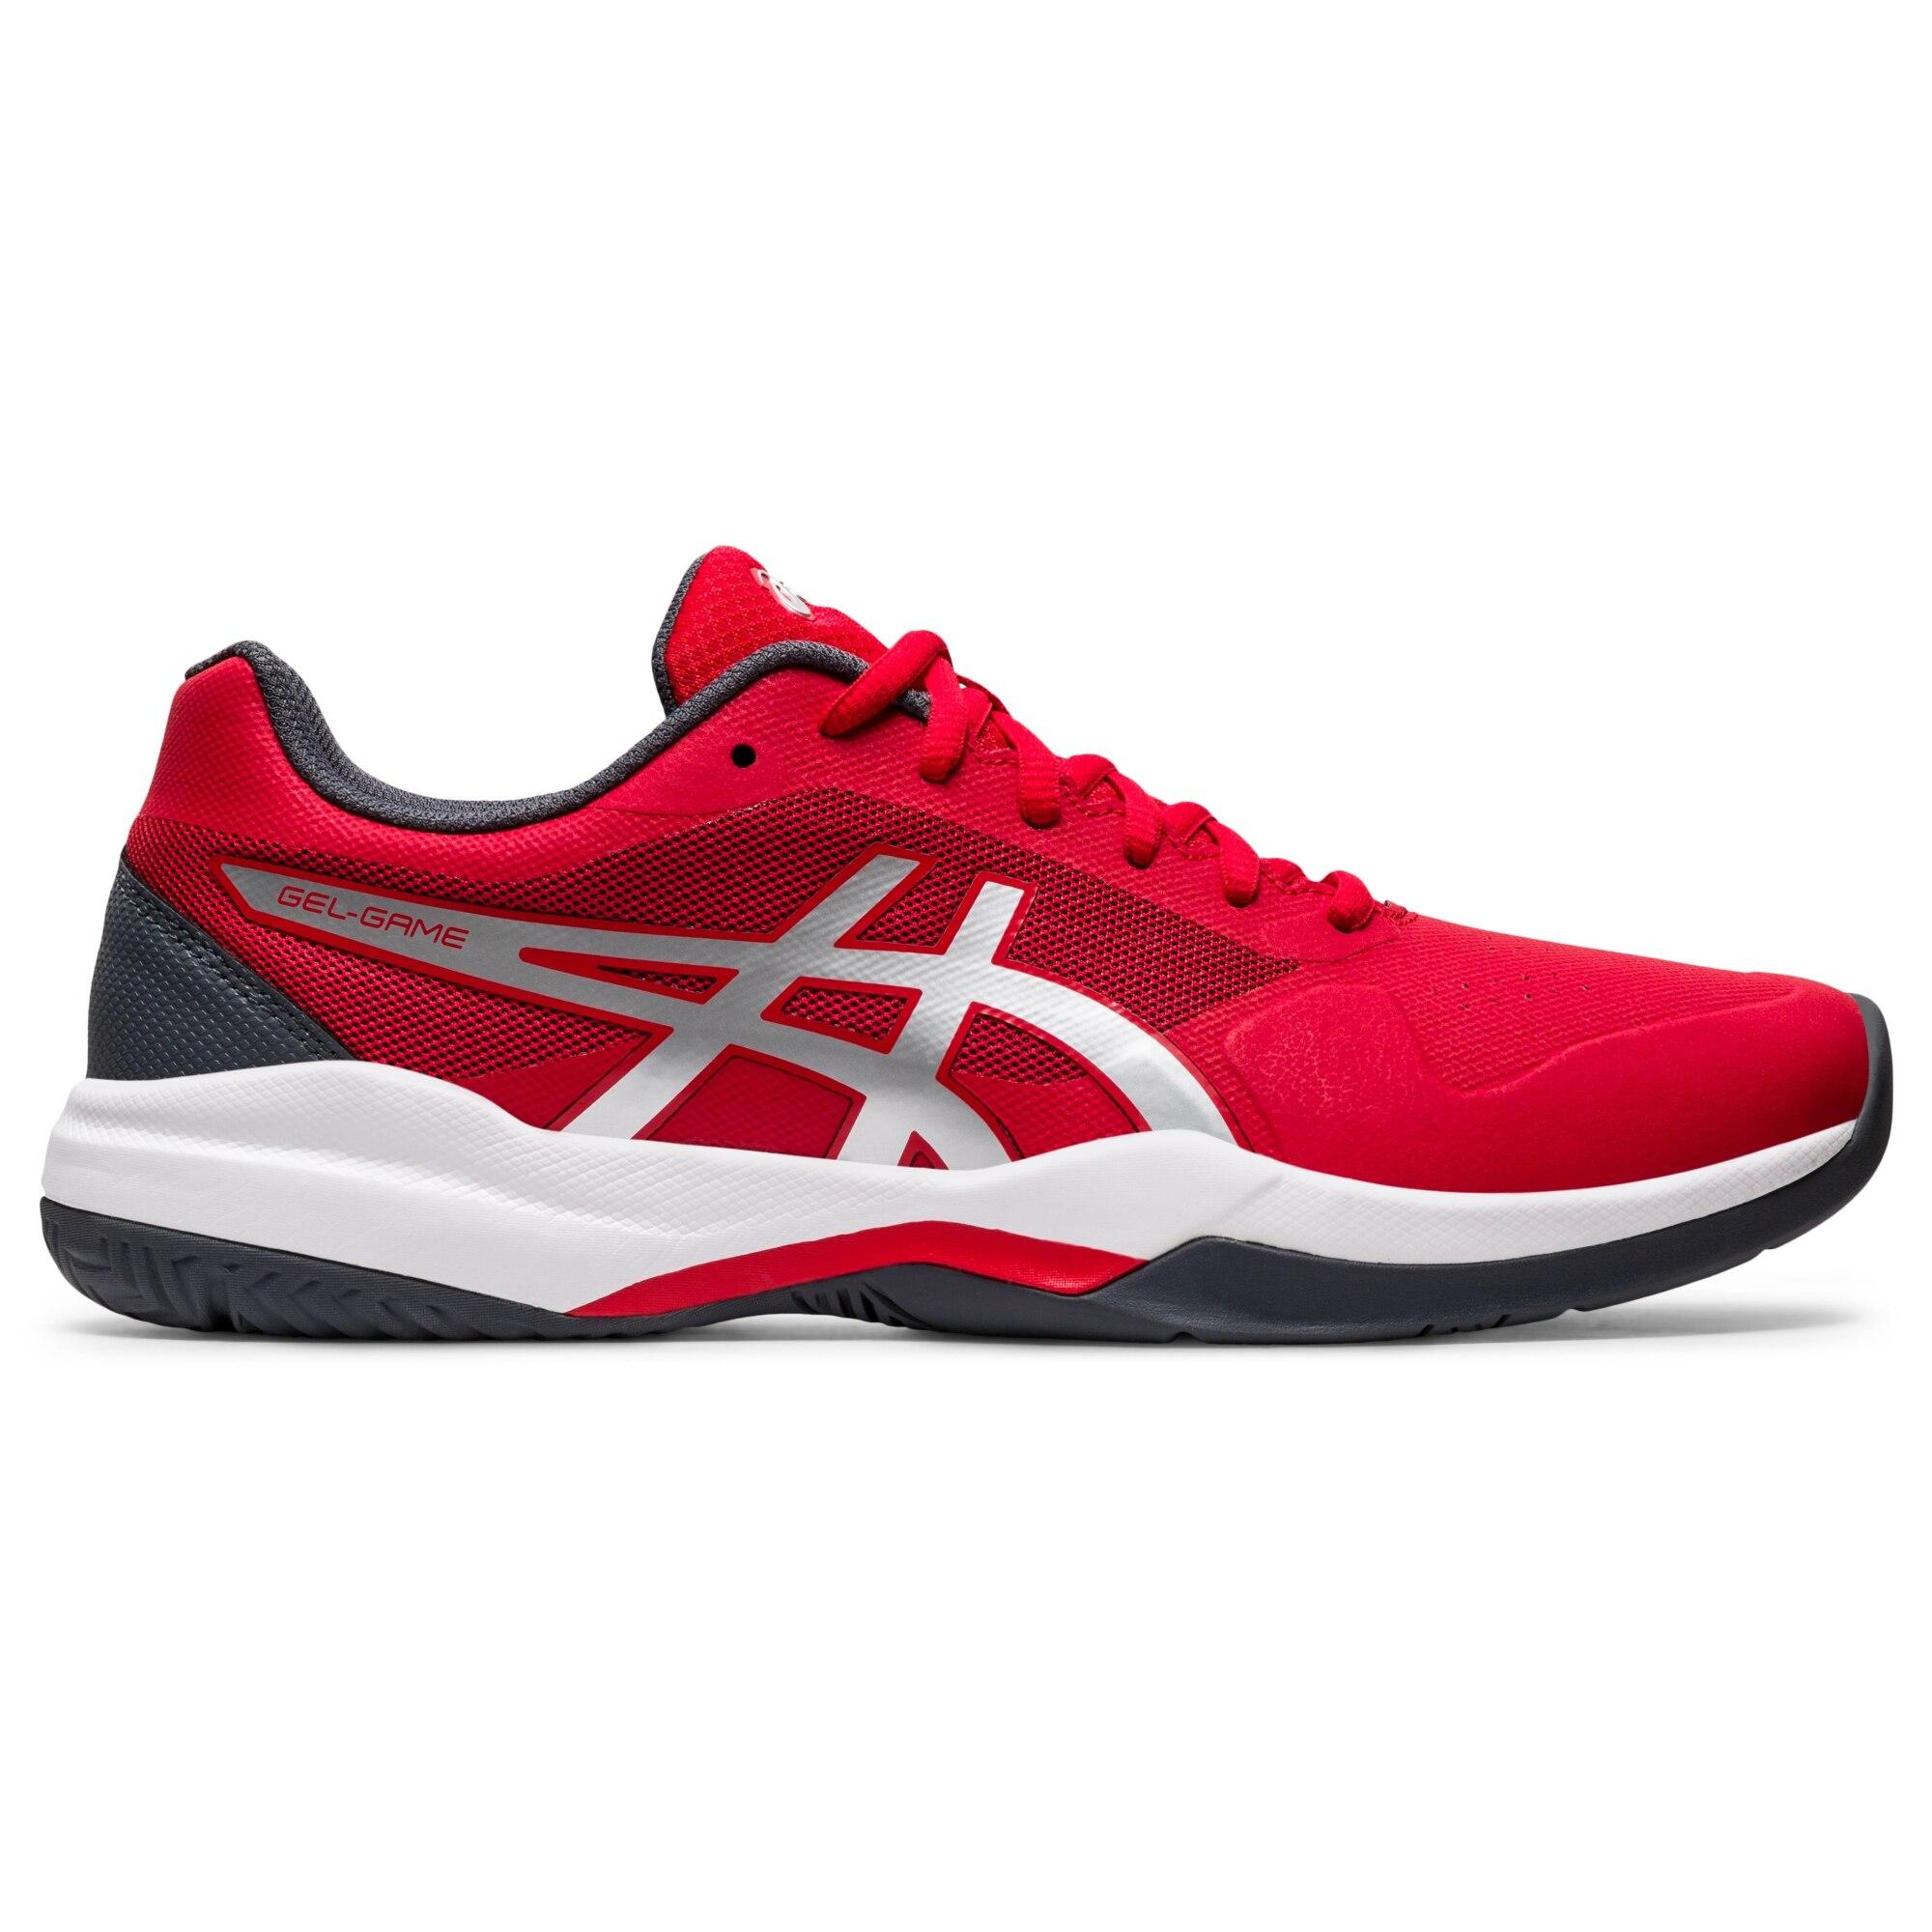 Asics Mens GEL-Game 7 Tennis Shoes - Classic Red/Pure Silver - www.ermes-unice.fr